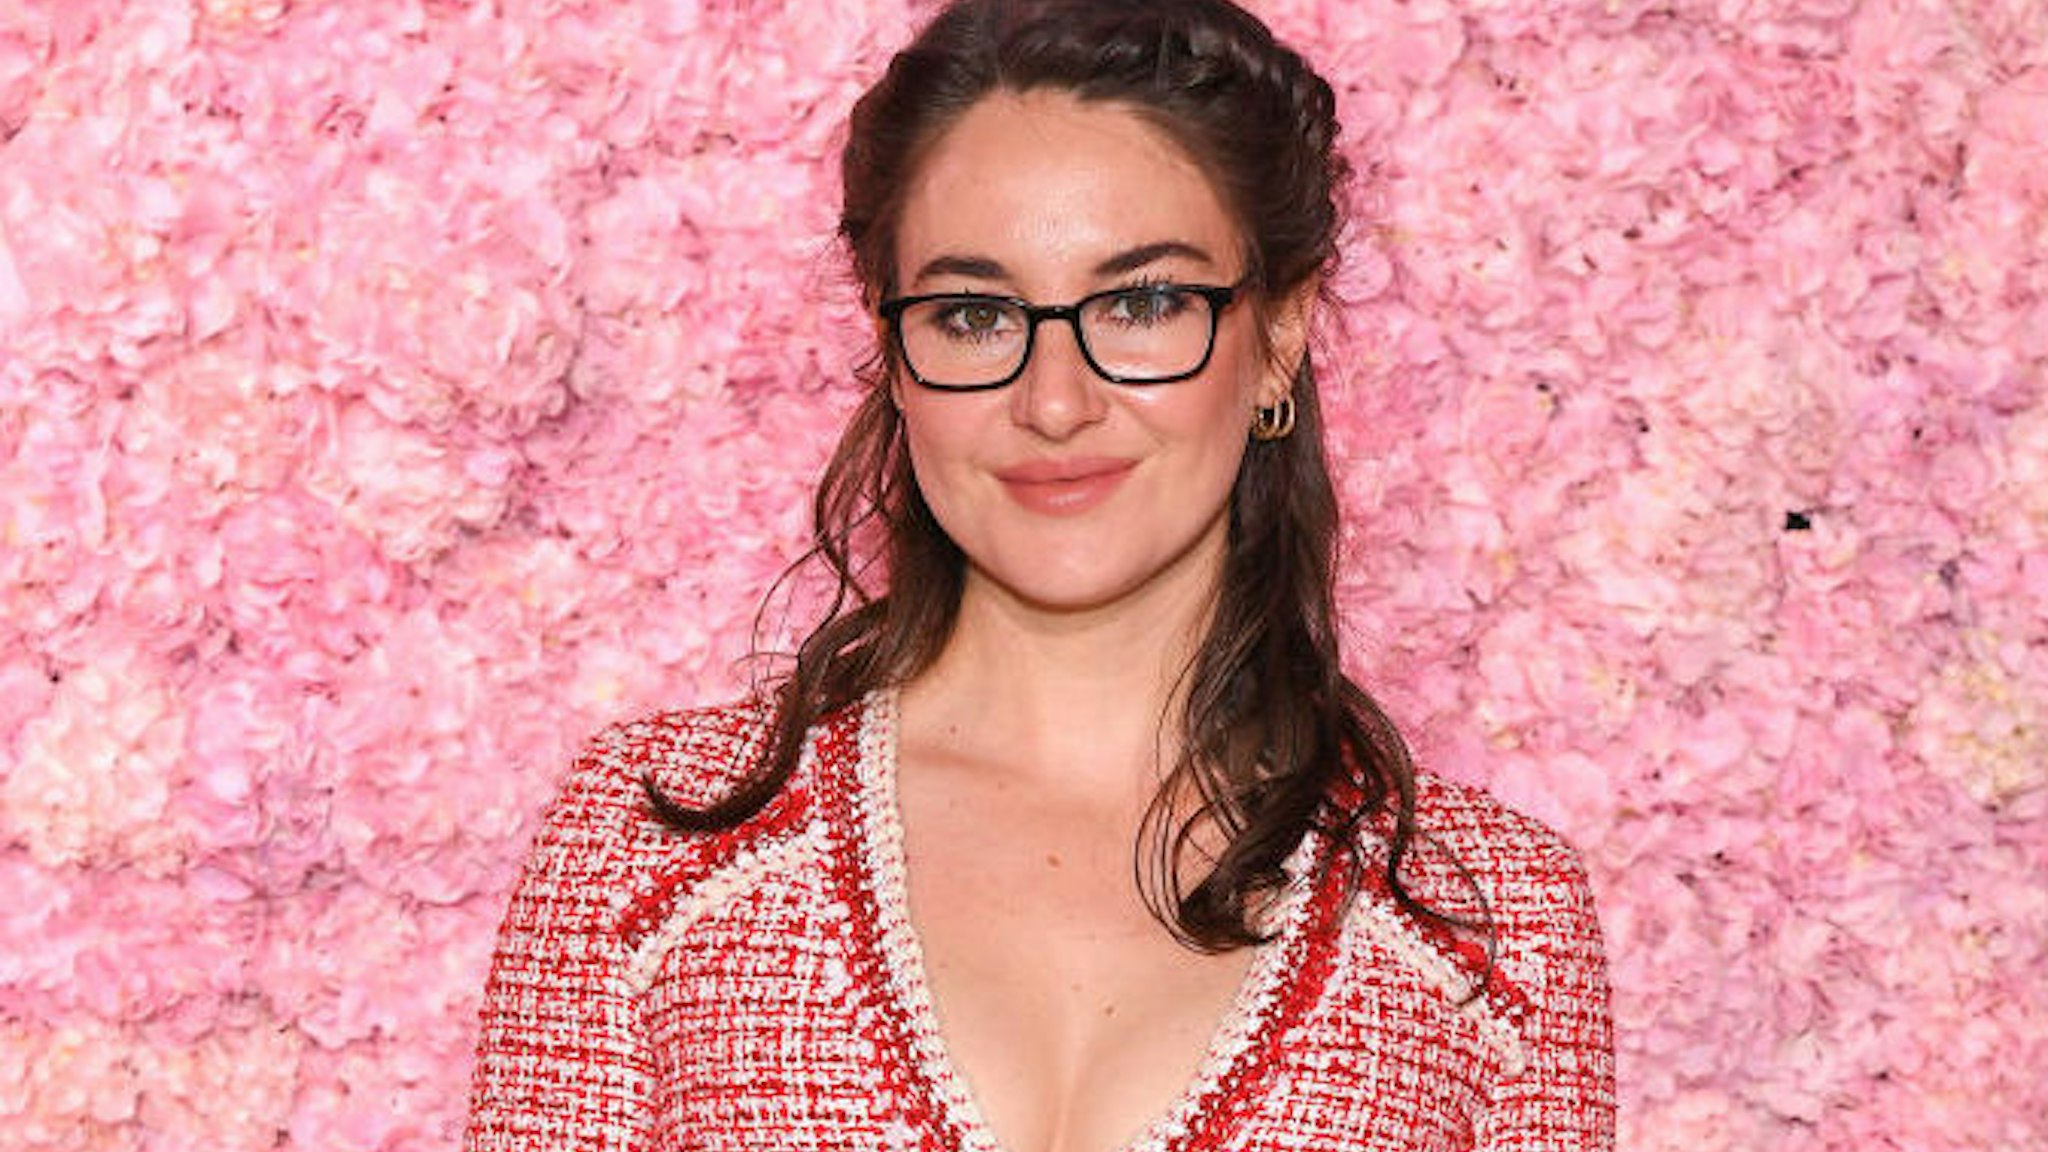 Shailene Woodley attends the Giambattista Valli show as part of the Paris Fashion Week Womenswear Fall/Winter 2020/2021 on March 02, 2020 in Paris, France.